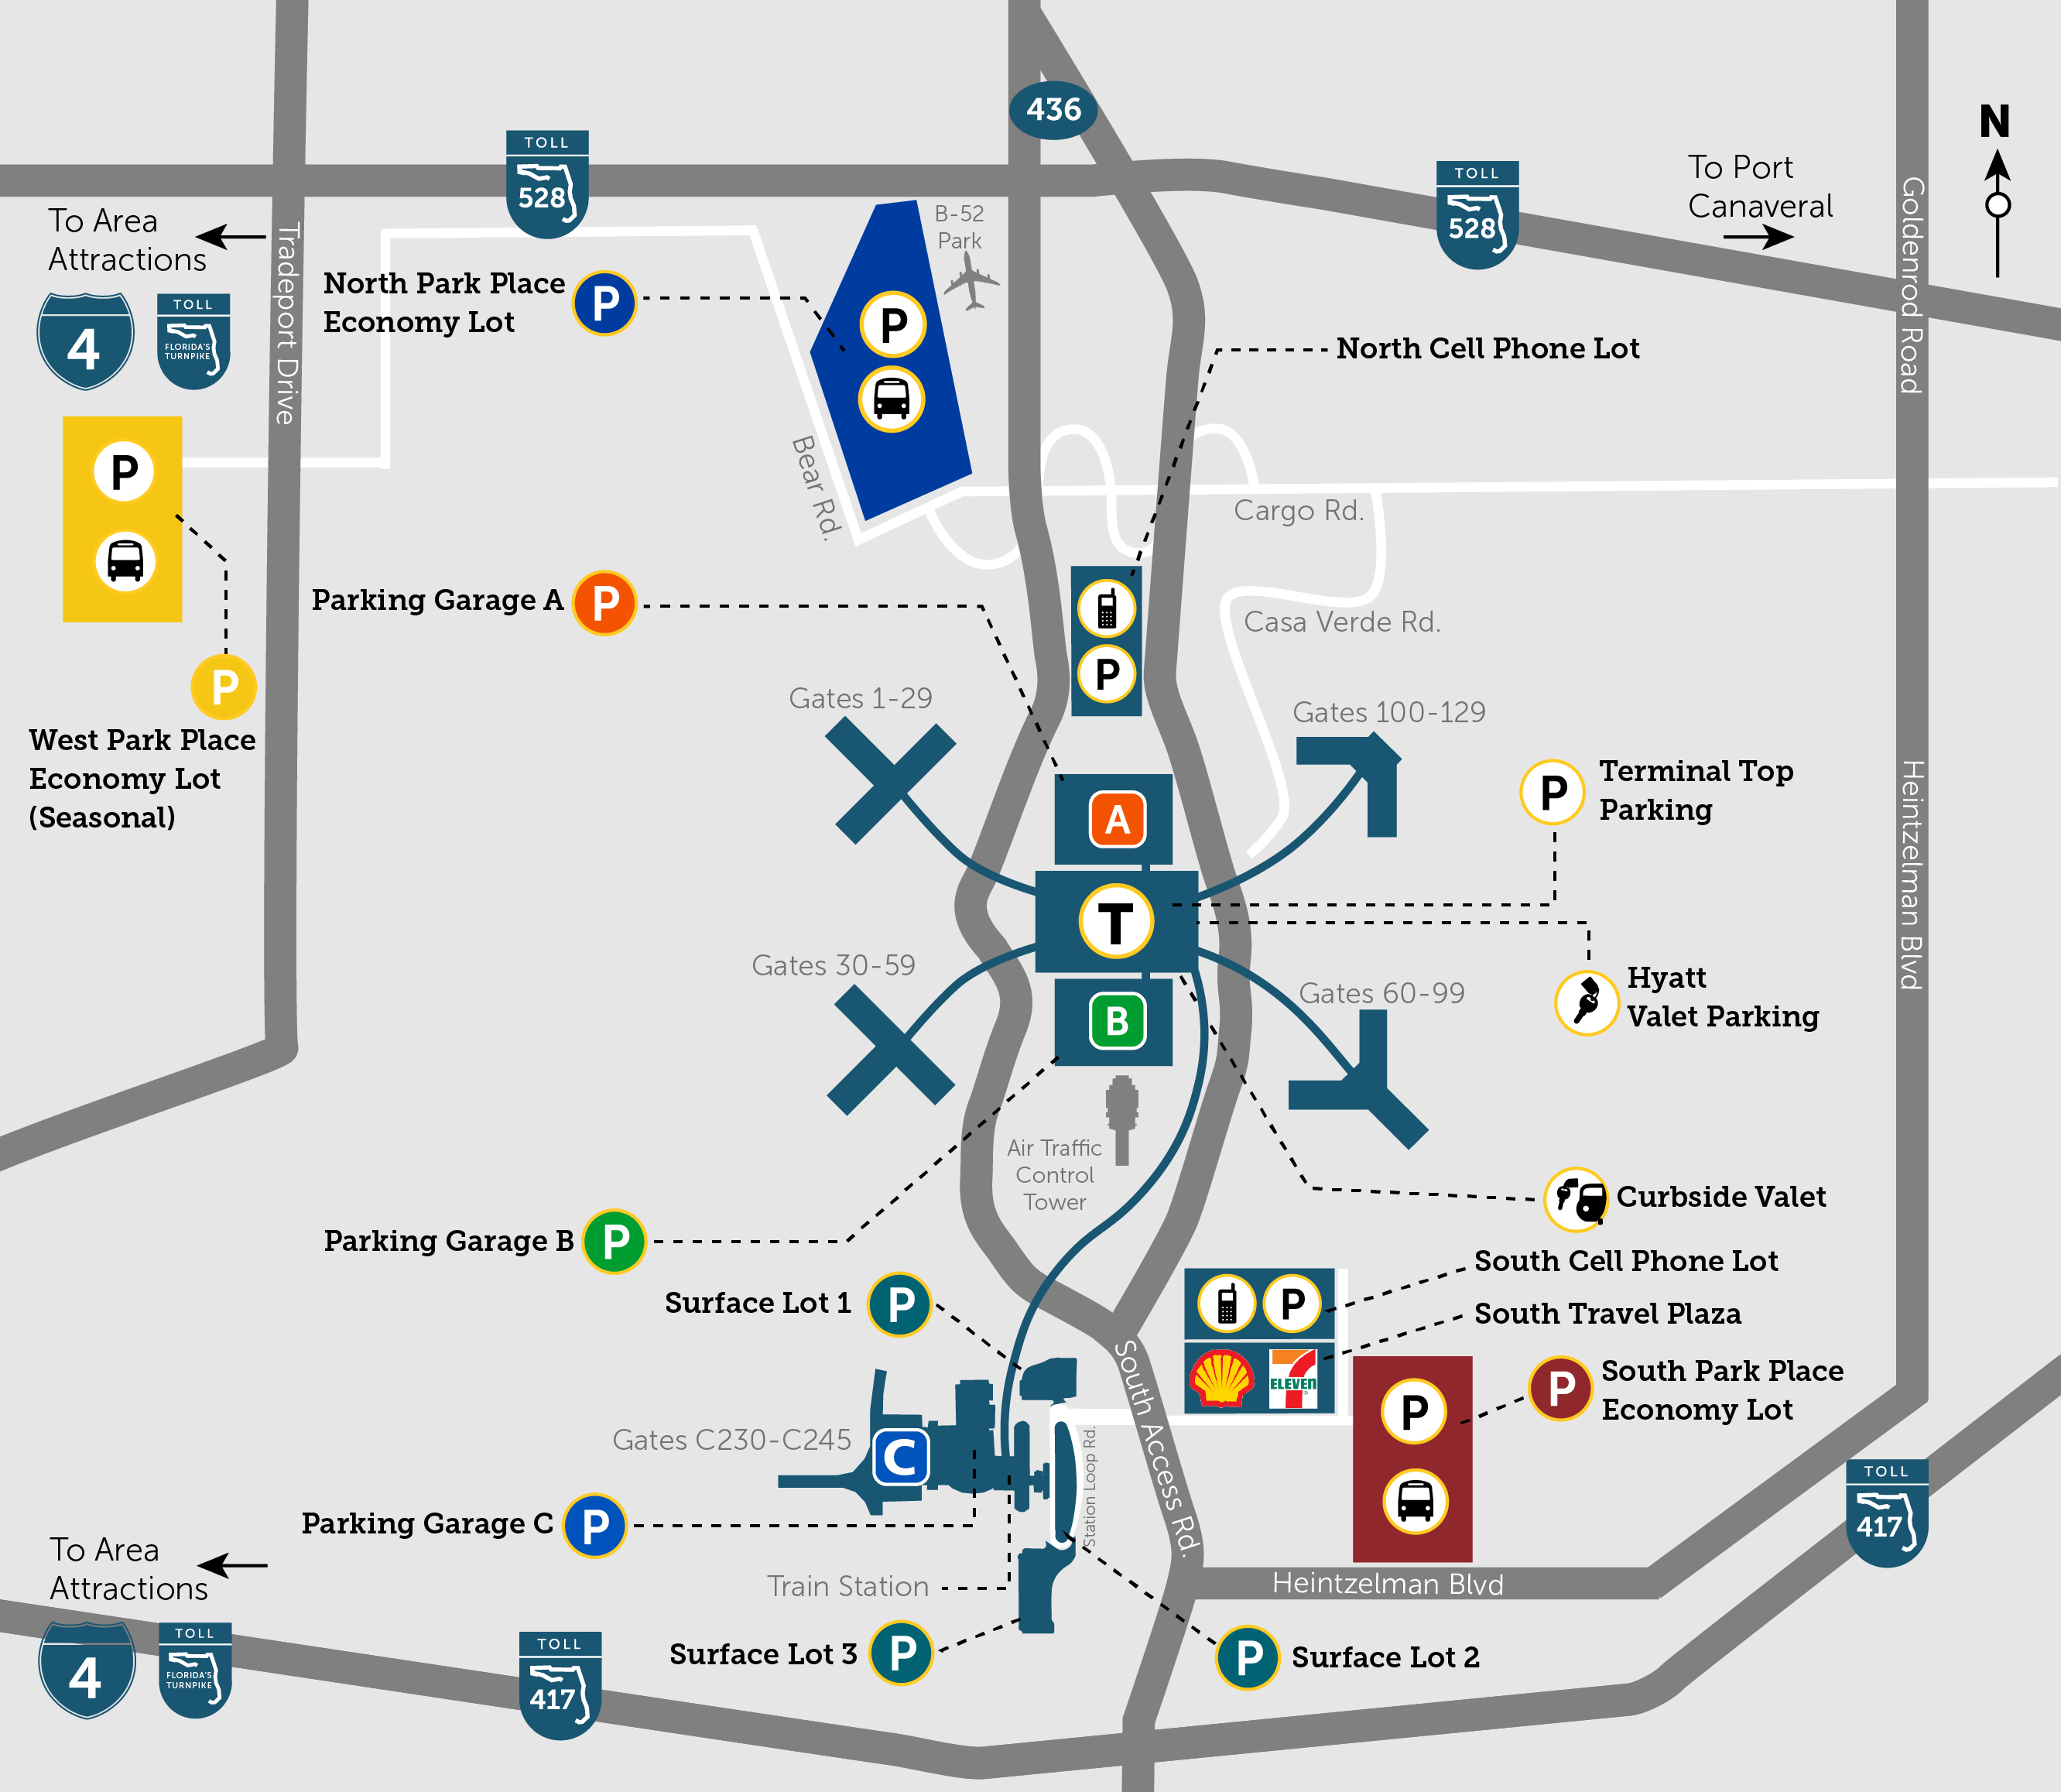 a illustrated map of MCO terminal parking directions, highlight where to park per terminal with various P icons in different colors that match the terminal color.” data-src=